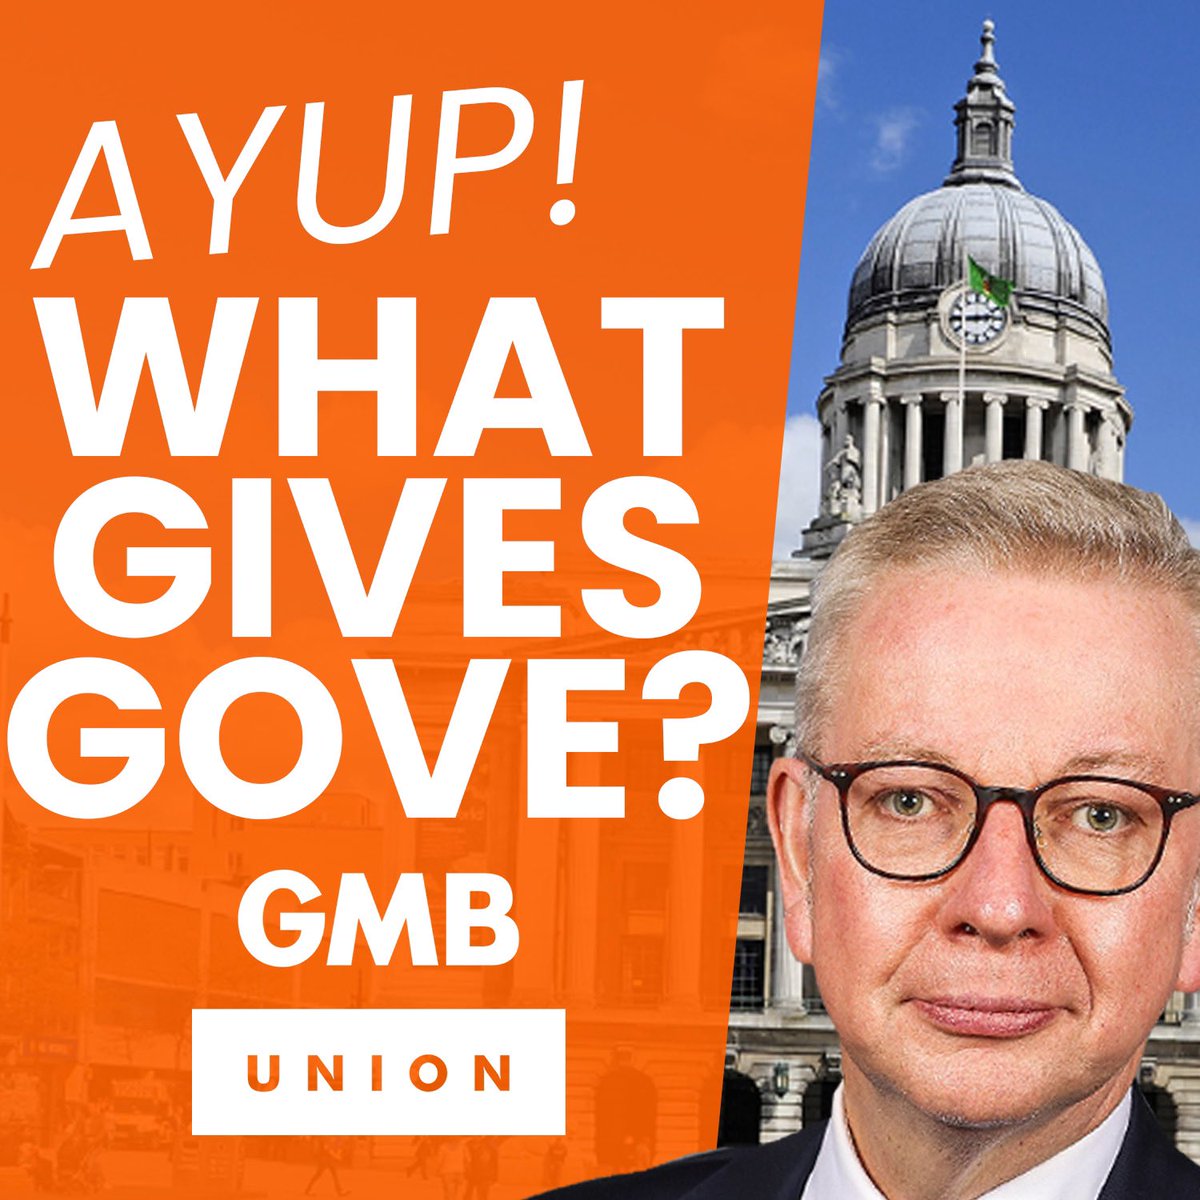 Nottingham’s being ripped off and workers are paying the price. The city’s funding has been cut by more than 40% since 2010 and people are asking, what gives @michaelgove? Add your name to GMBs open letter calling out Gove’s funding hypocrisy. ✍️ at whatgivesgove.co.uk